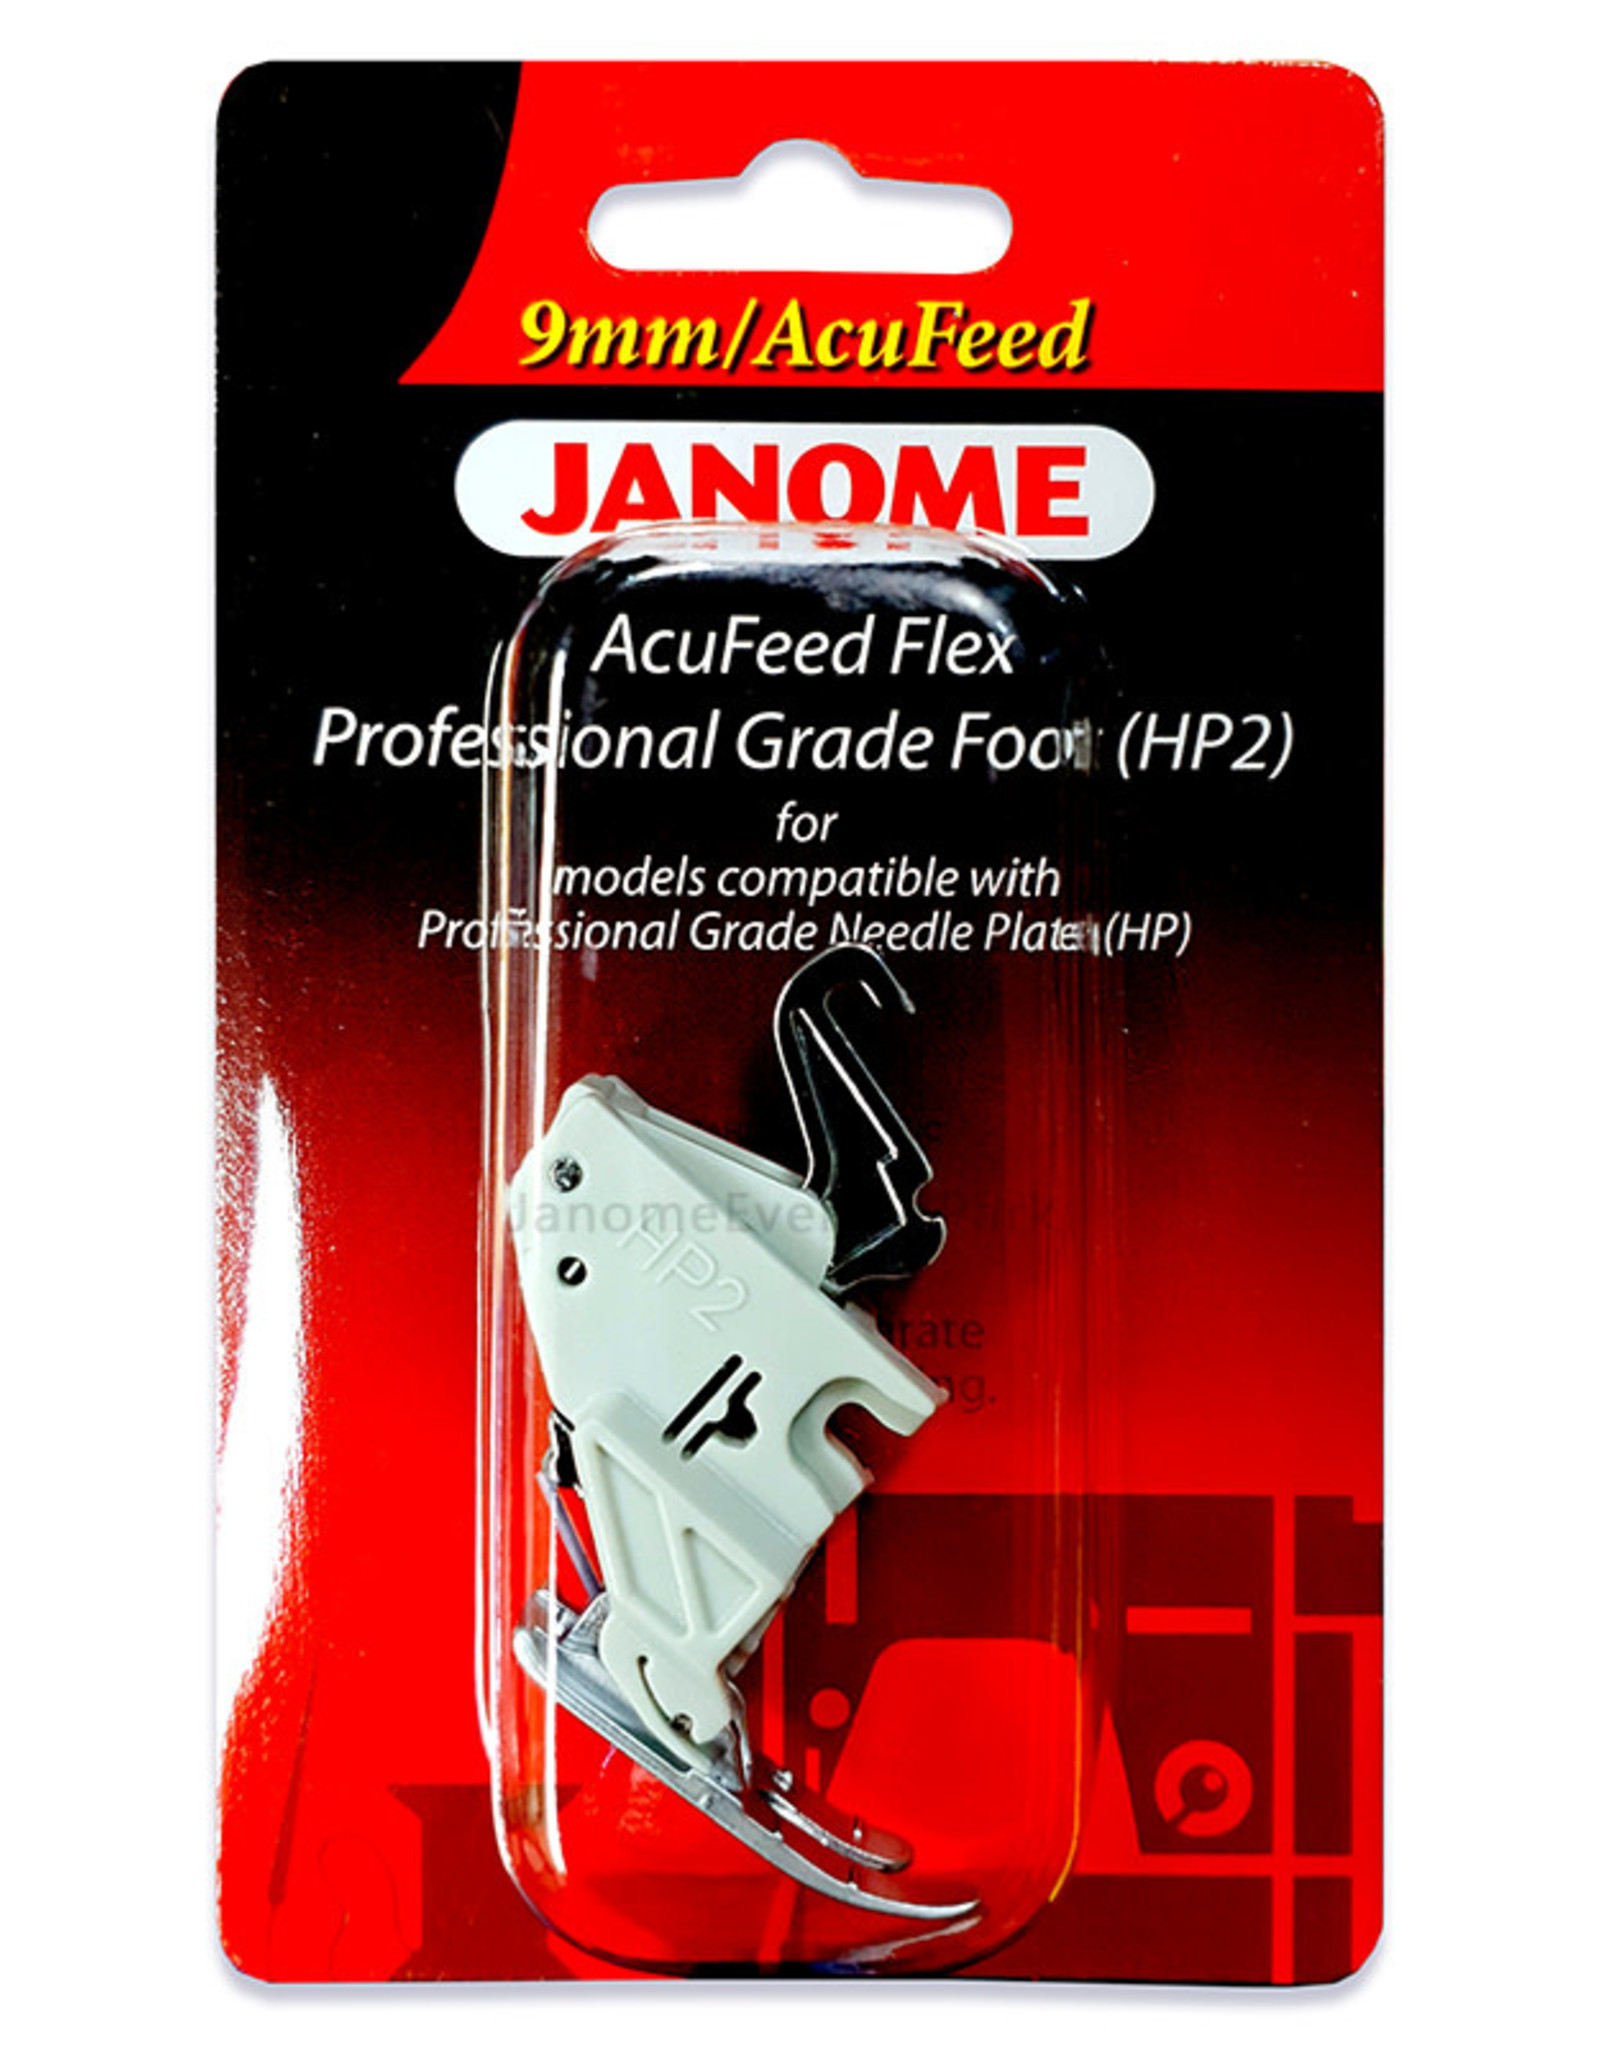 Janome AcuFeed Flex Professional Grade Foot HP2 202415004